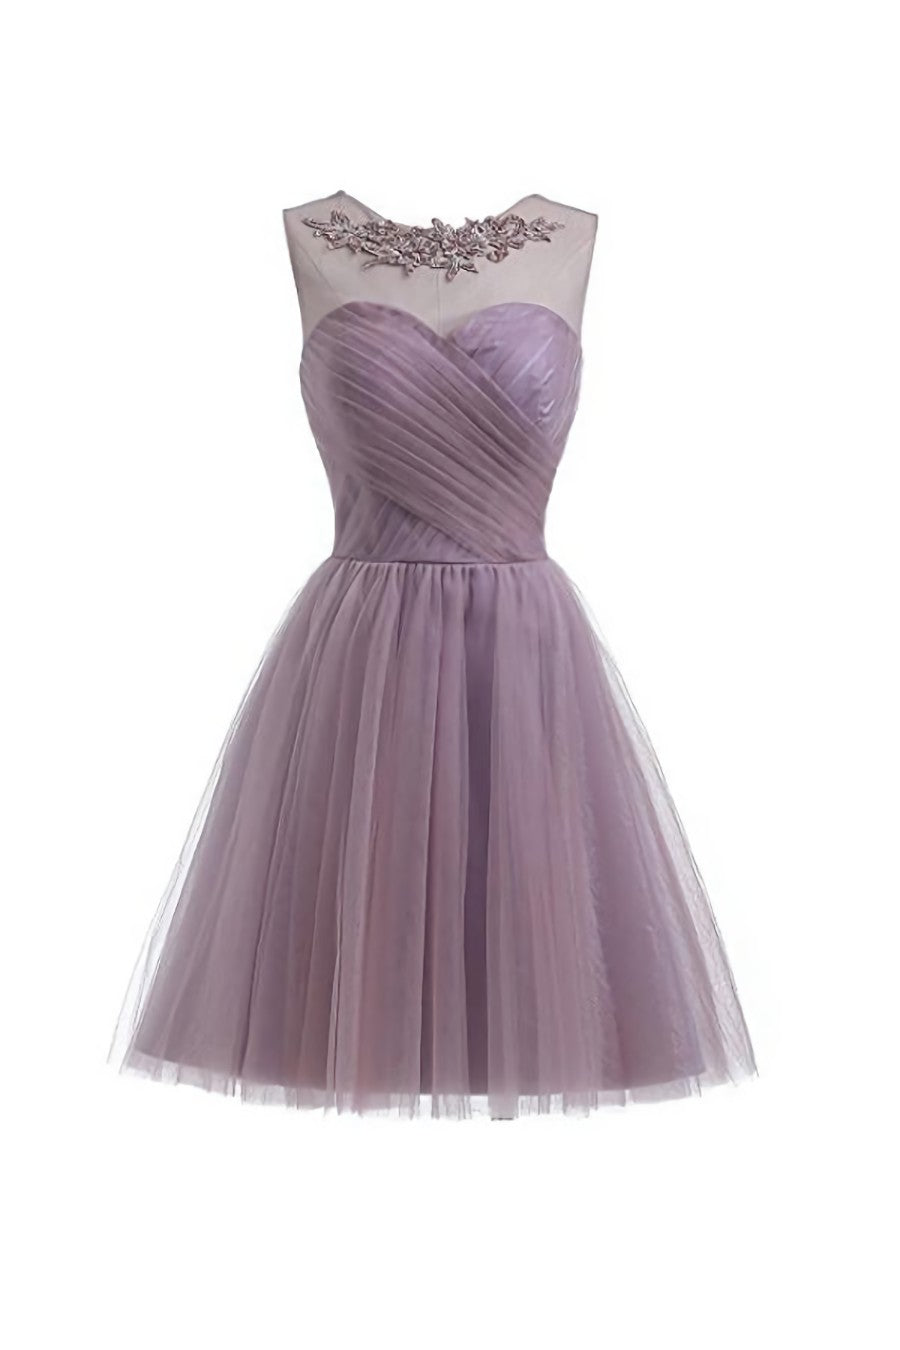 Party Dress Dress Up, Sweetheart Tulle Homecoming Dresses A Line Scoop Short Prom Dress